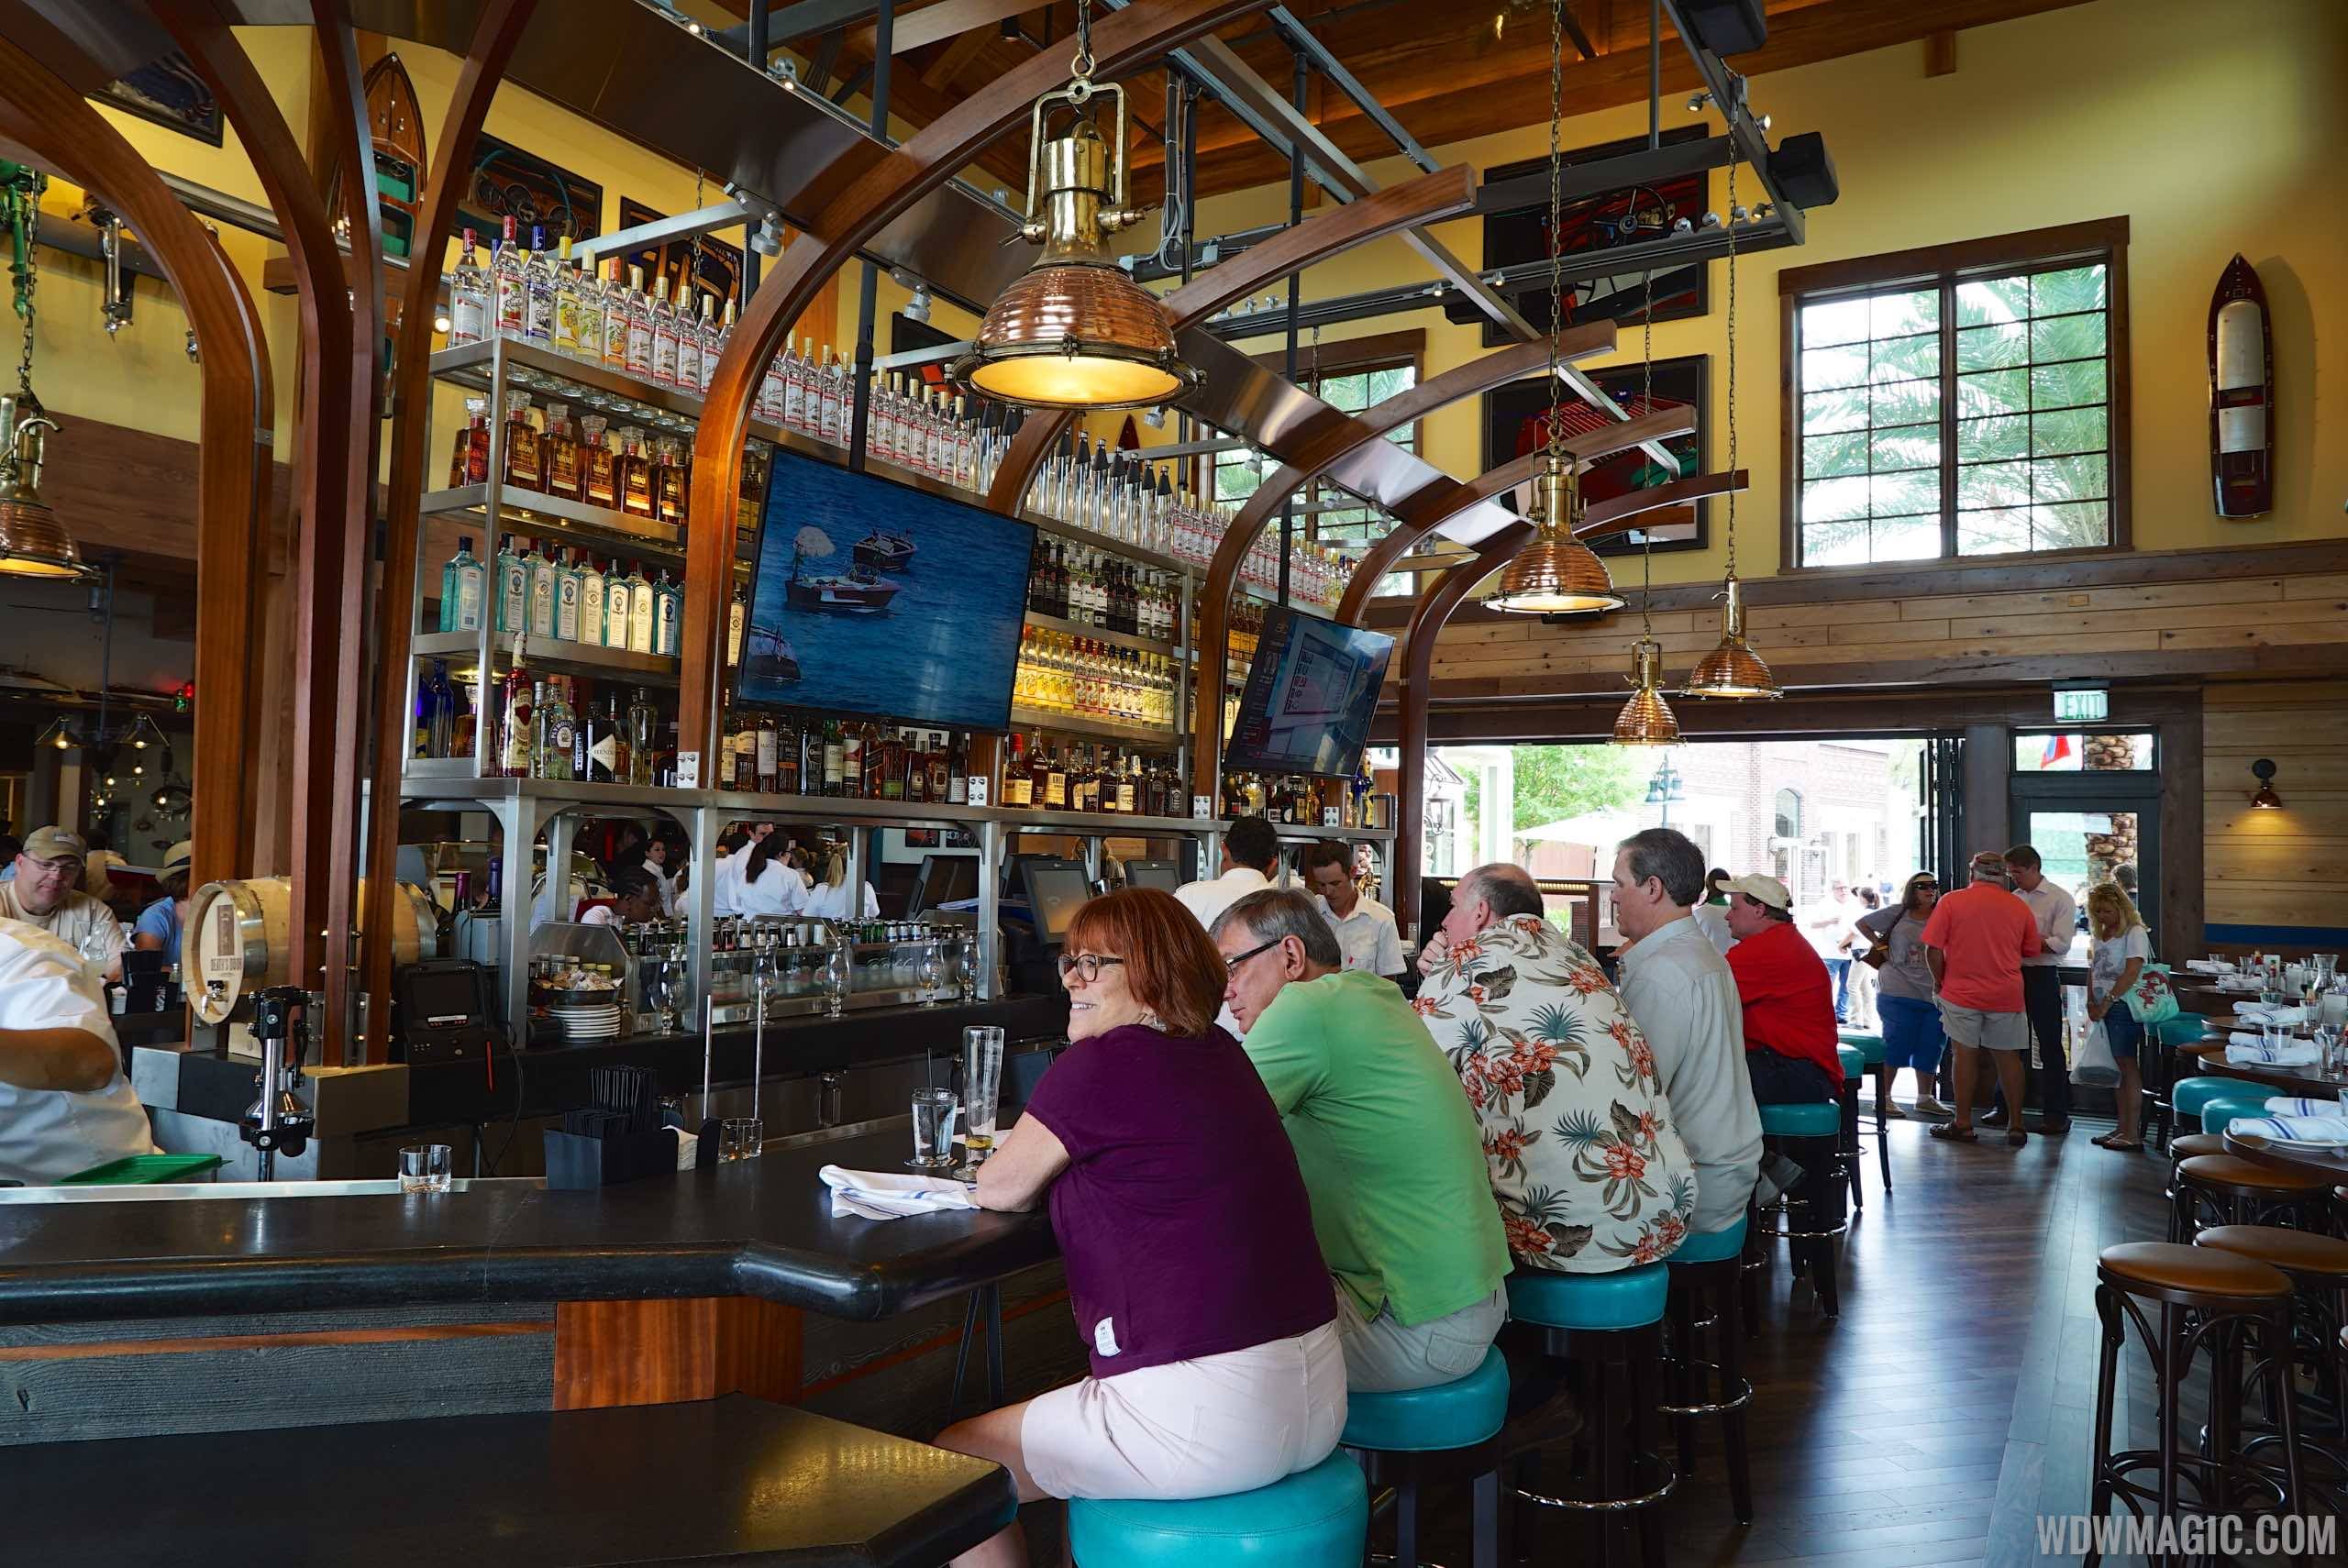 REVIEW - The BOATHOUSE at Disney Springs The Landing